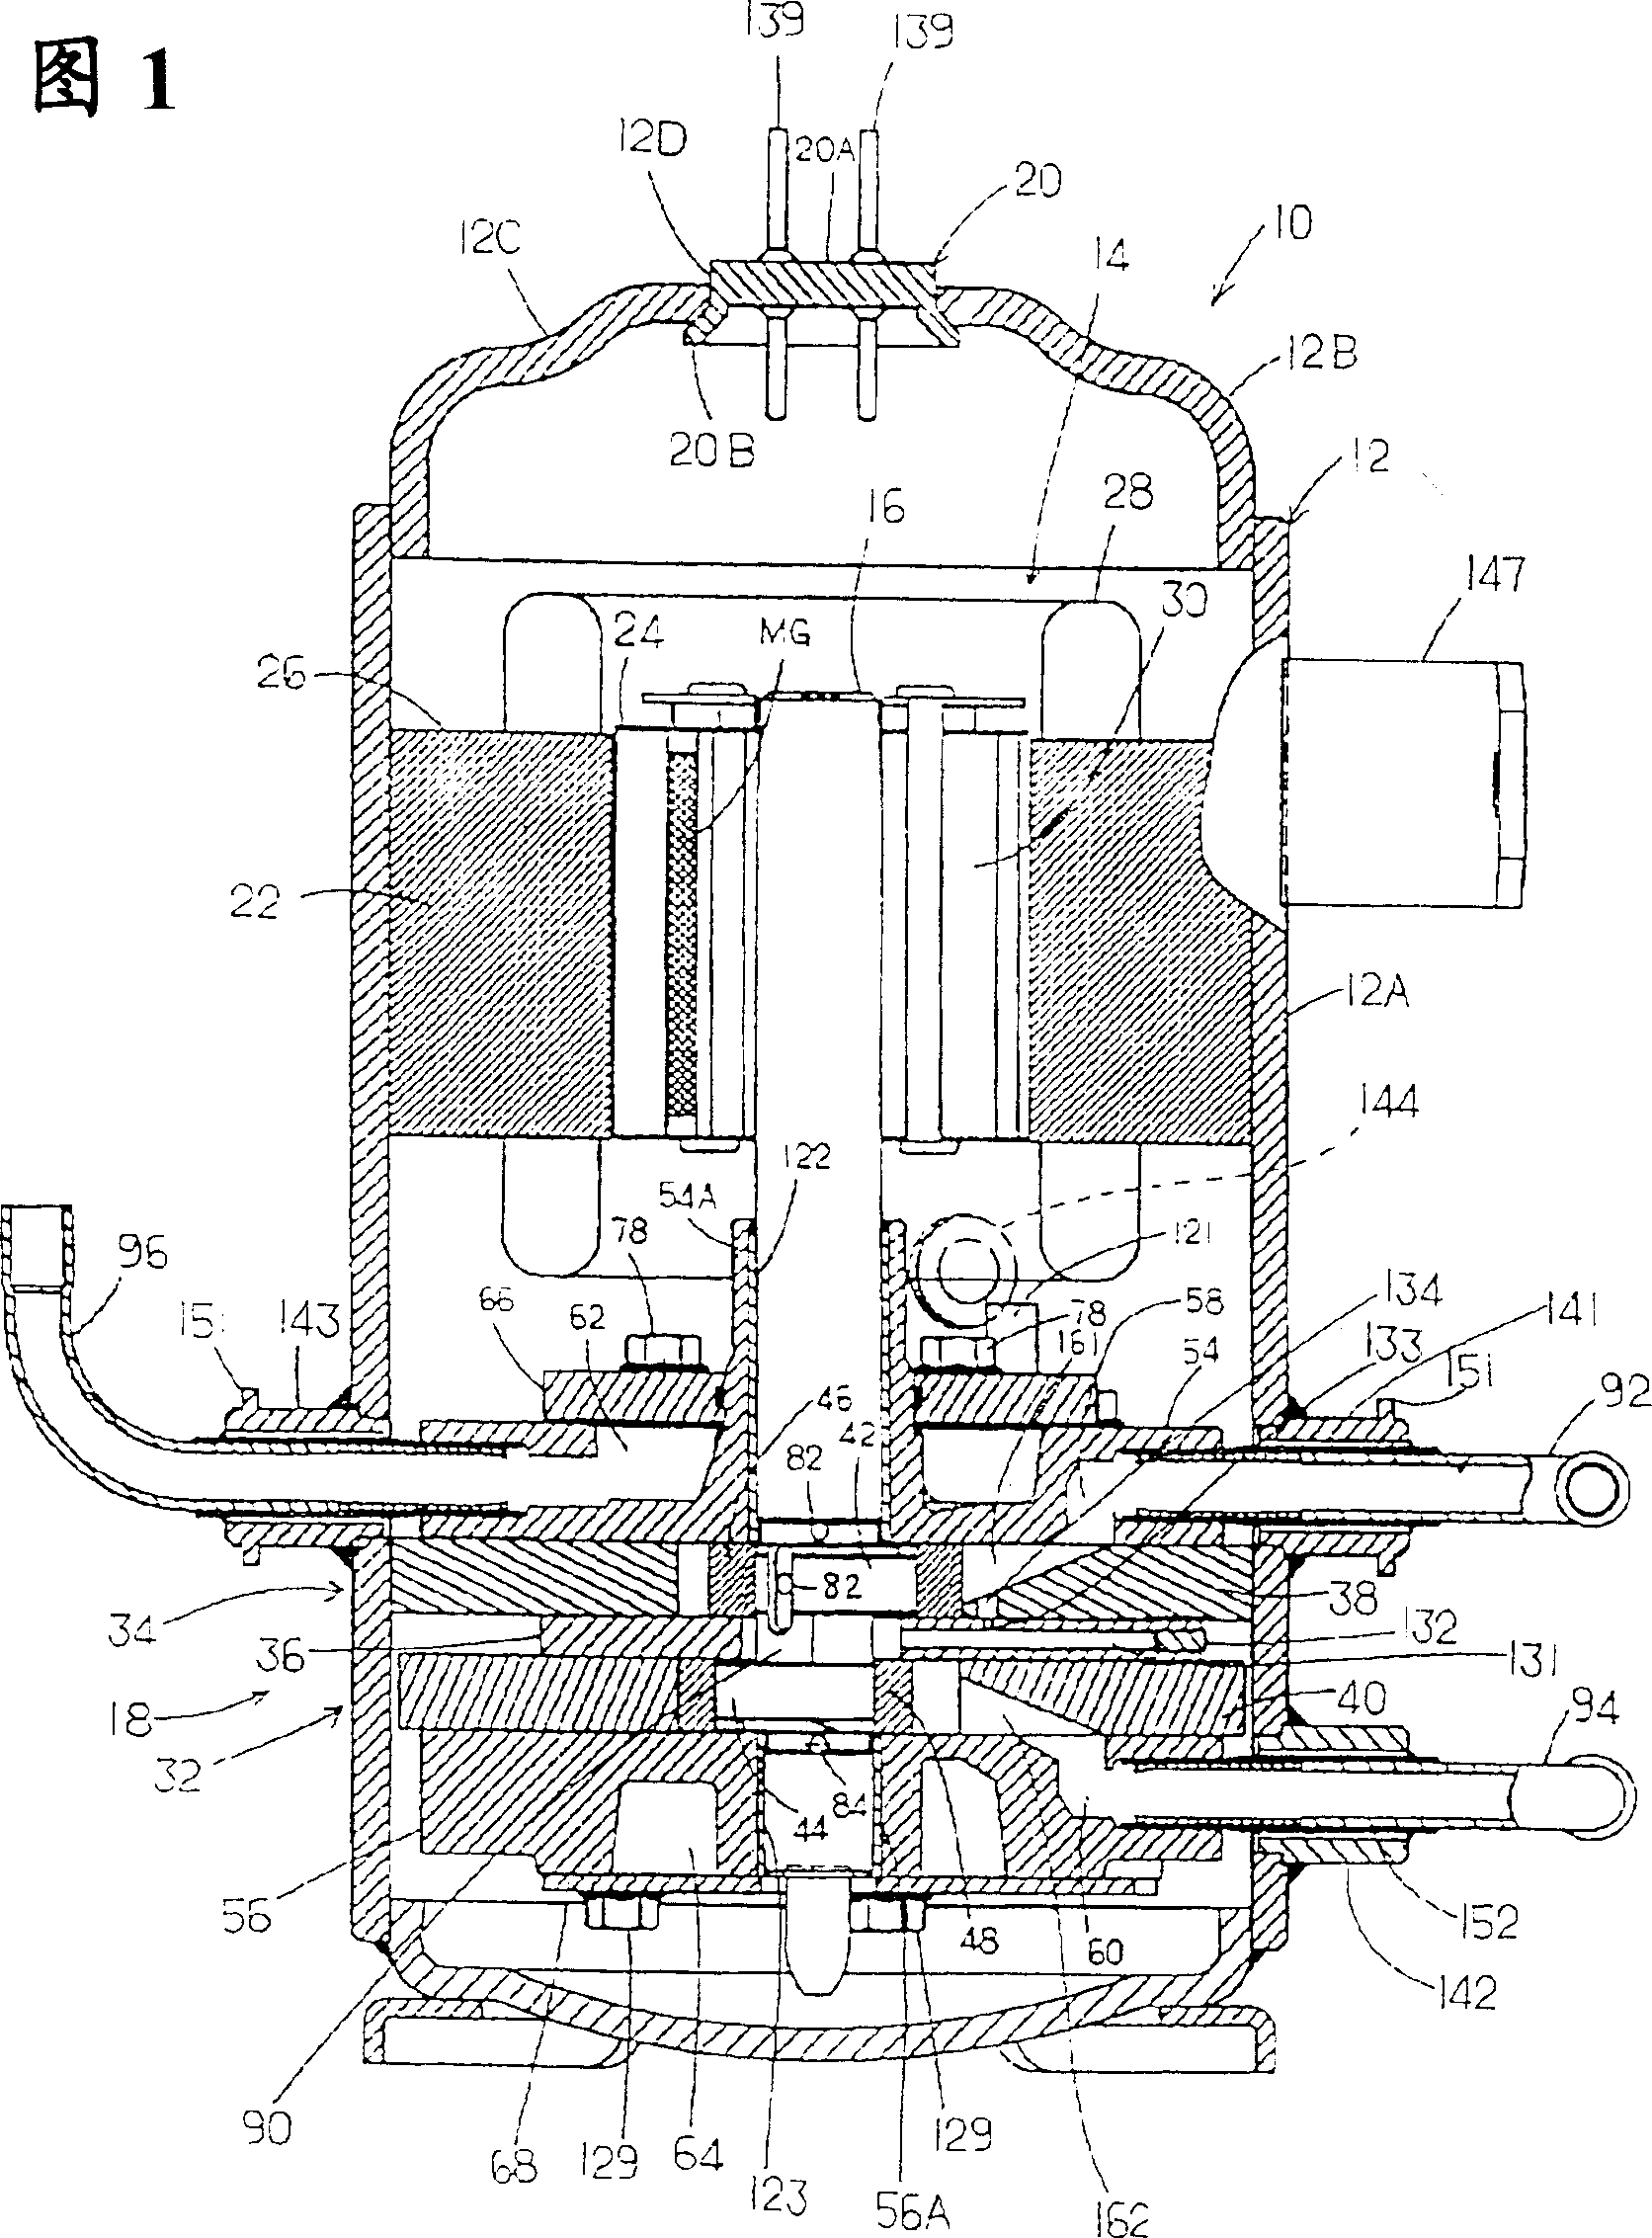 Defrosting device of refrigerant loop and rotary compressor for refrigerant loop